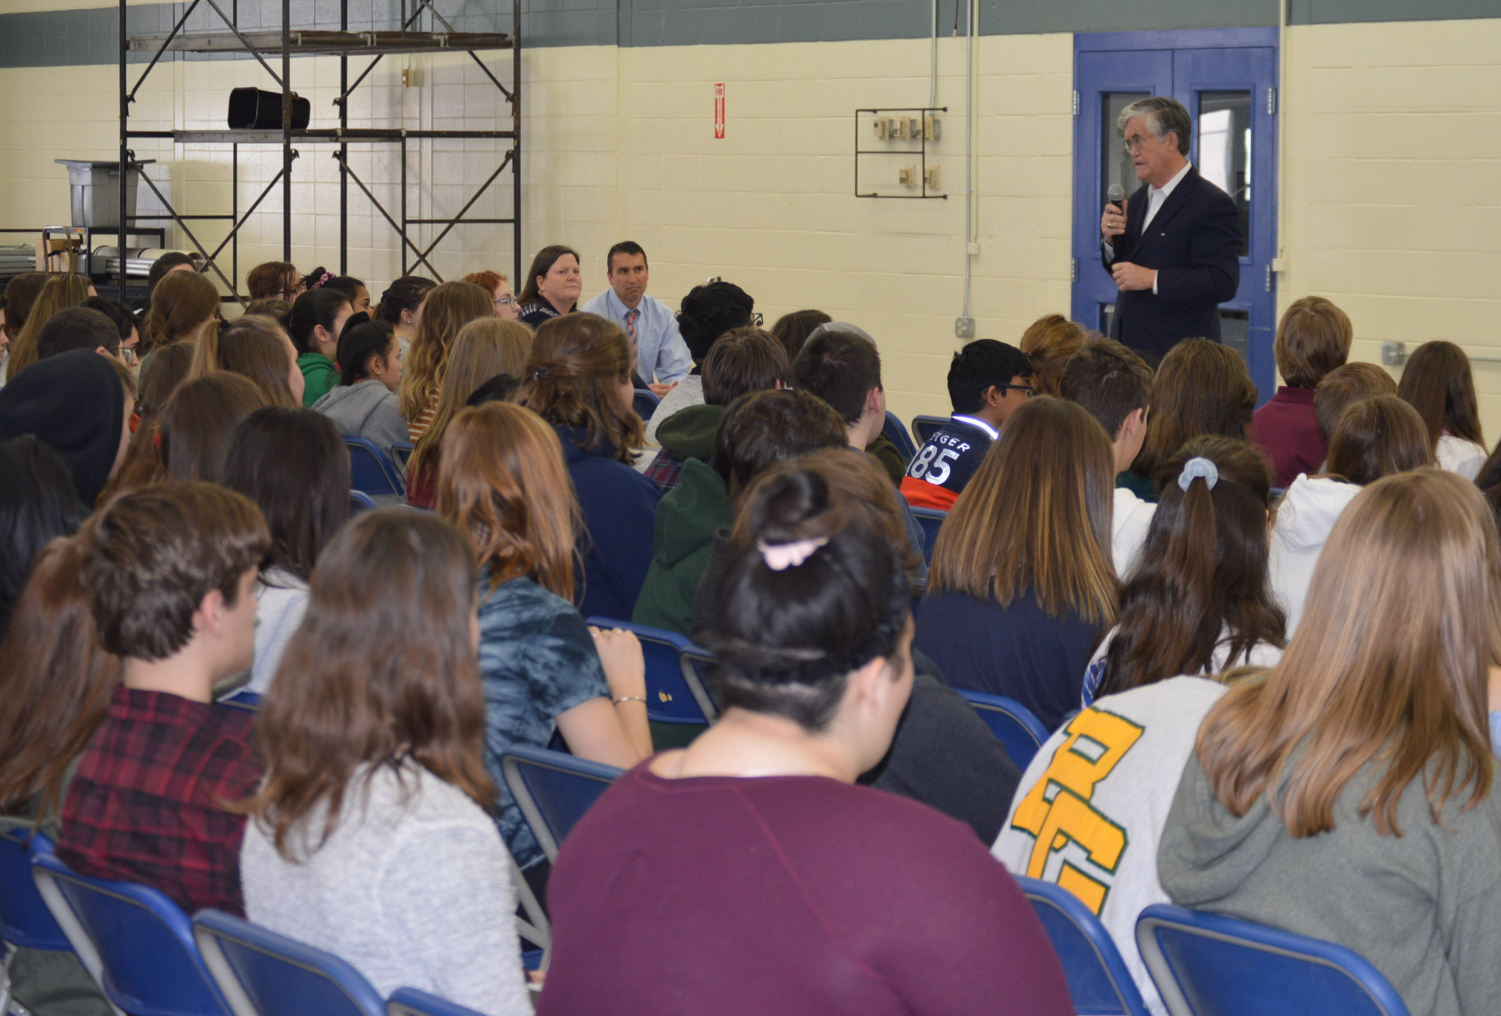 Students listen to John Broderick, a former Supreme Court judge, tell the story of how his sons mental health impacted him. Since his son, who has mental health issues, physically attacked him in 2002, he has become an advocate for mental health awareness. 